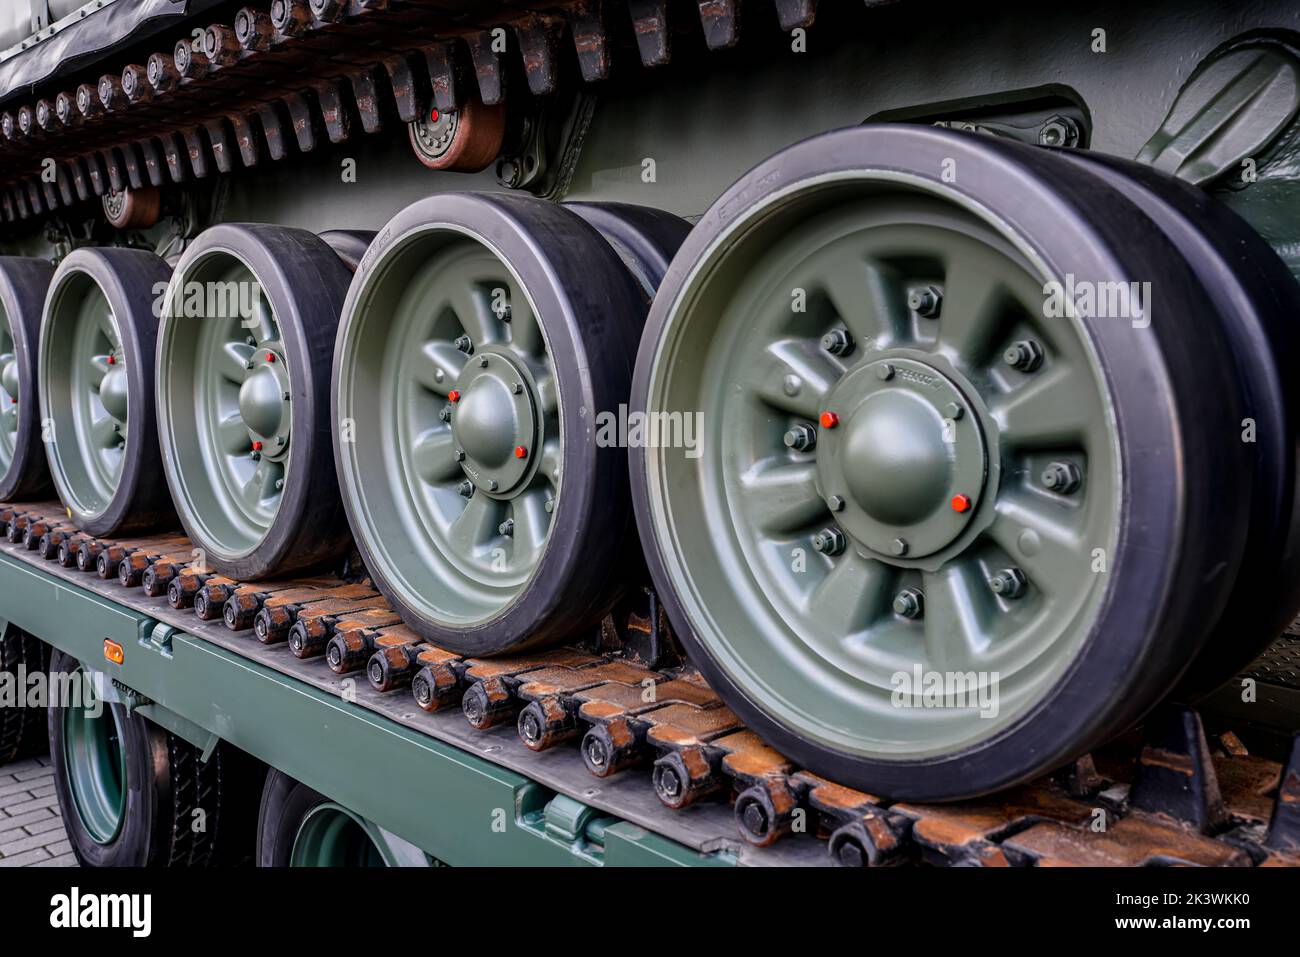 Tank armoured vehicle loaded at truck, detail to wheels on continuous tread tracks Stock Photo